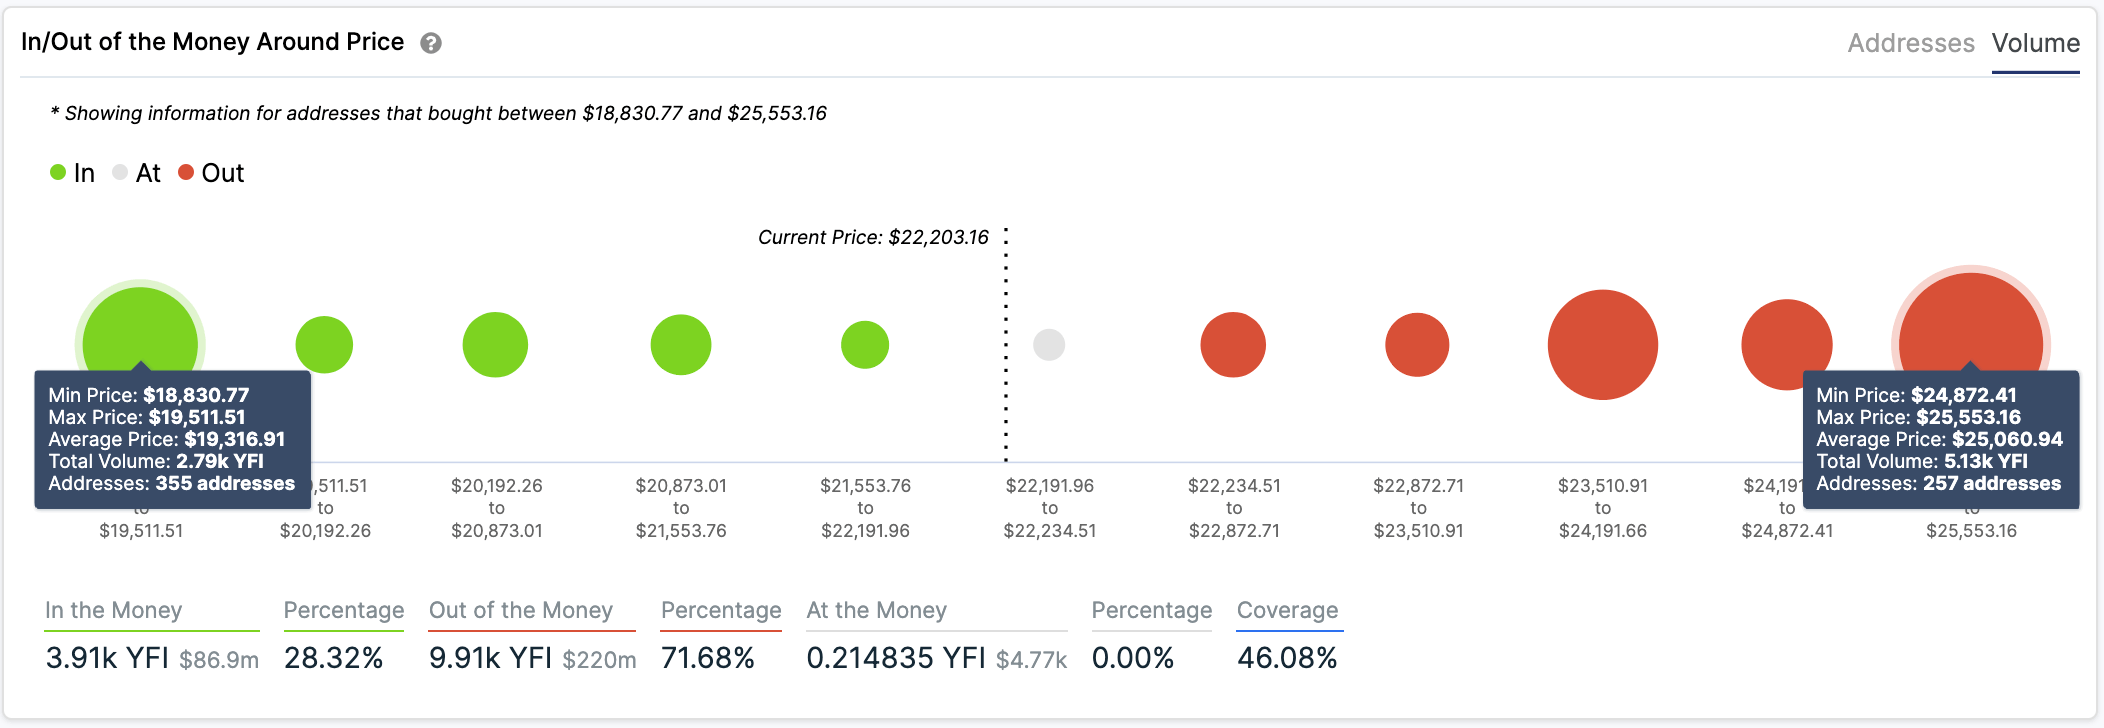 In/Out of the Money Around Price for YFI